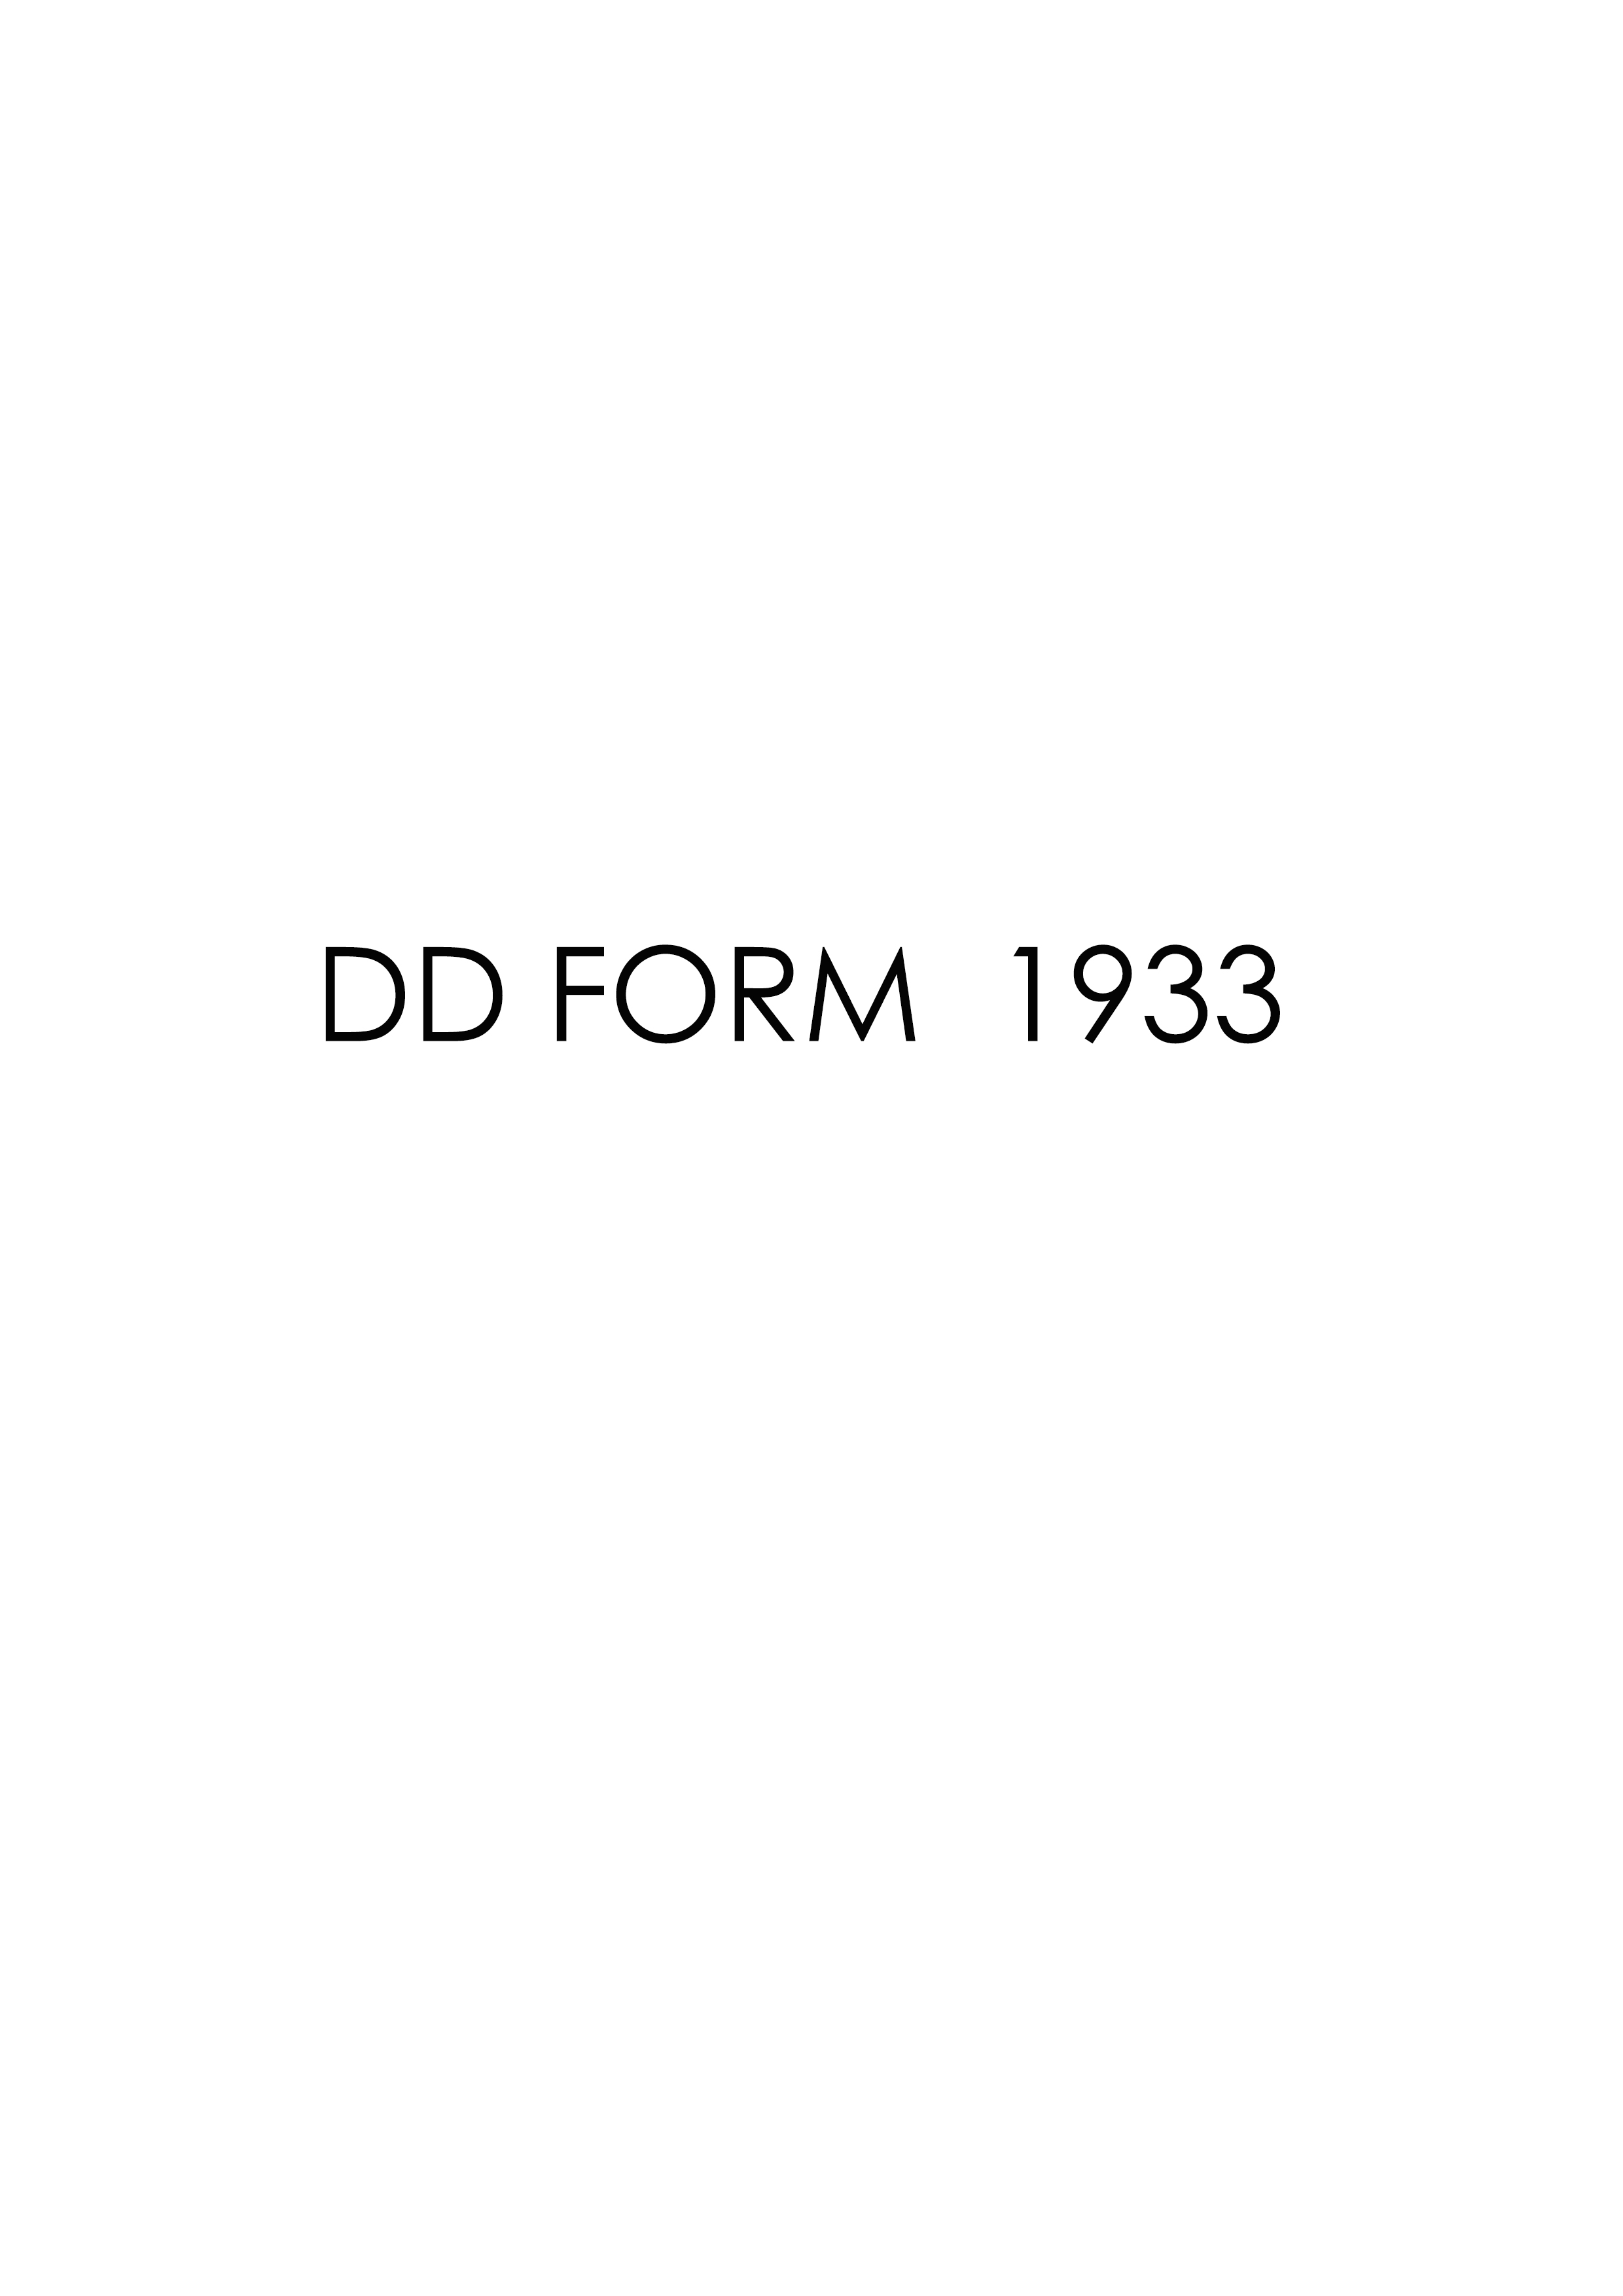 Download Fillable dd Form 1933